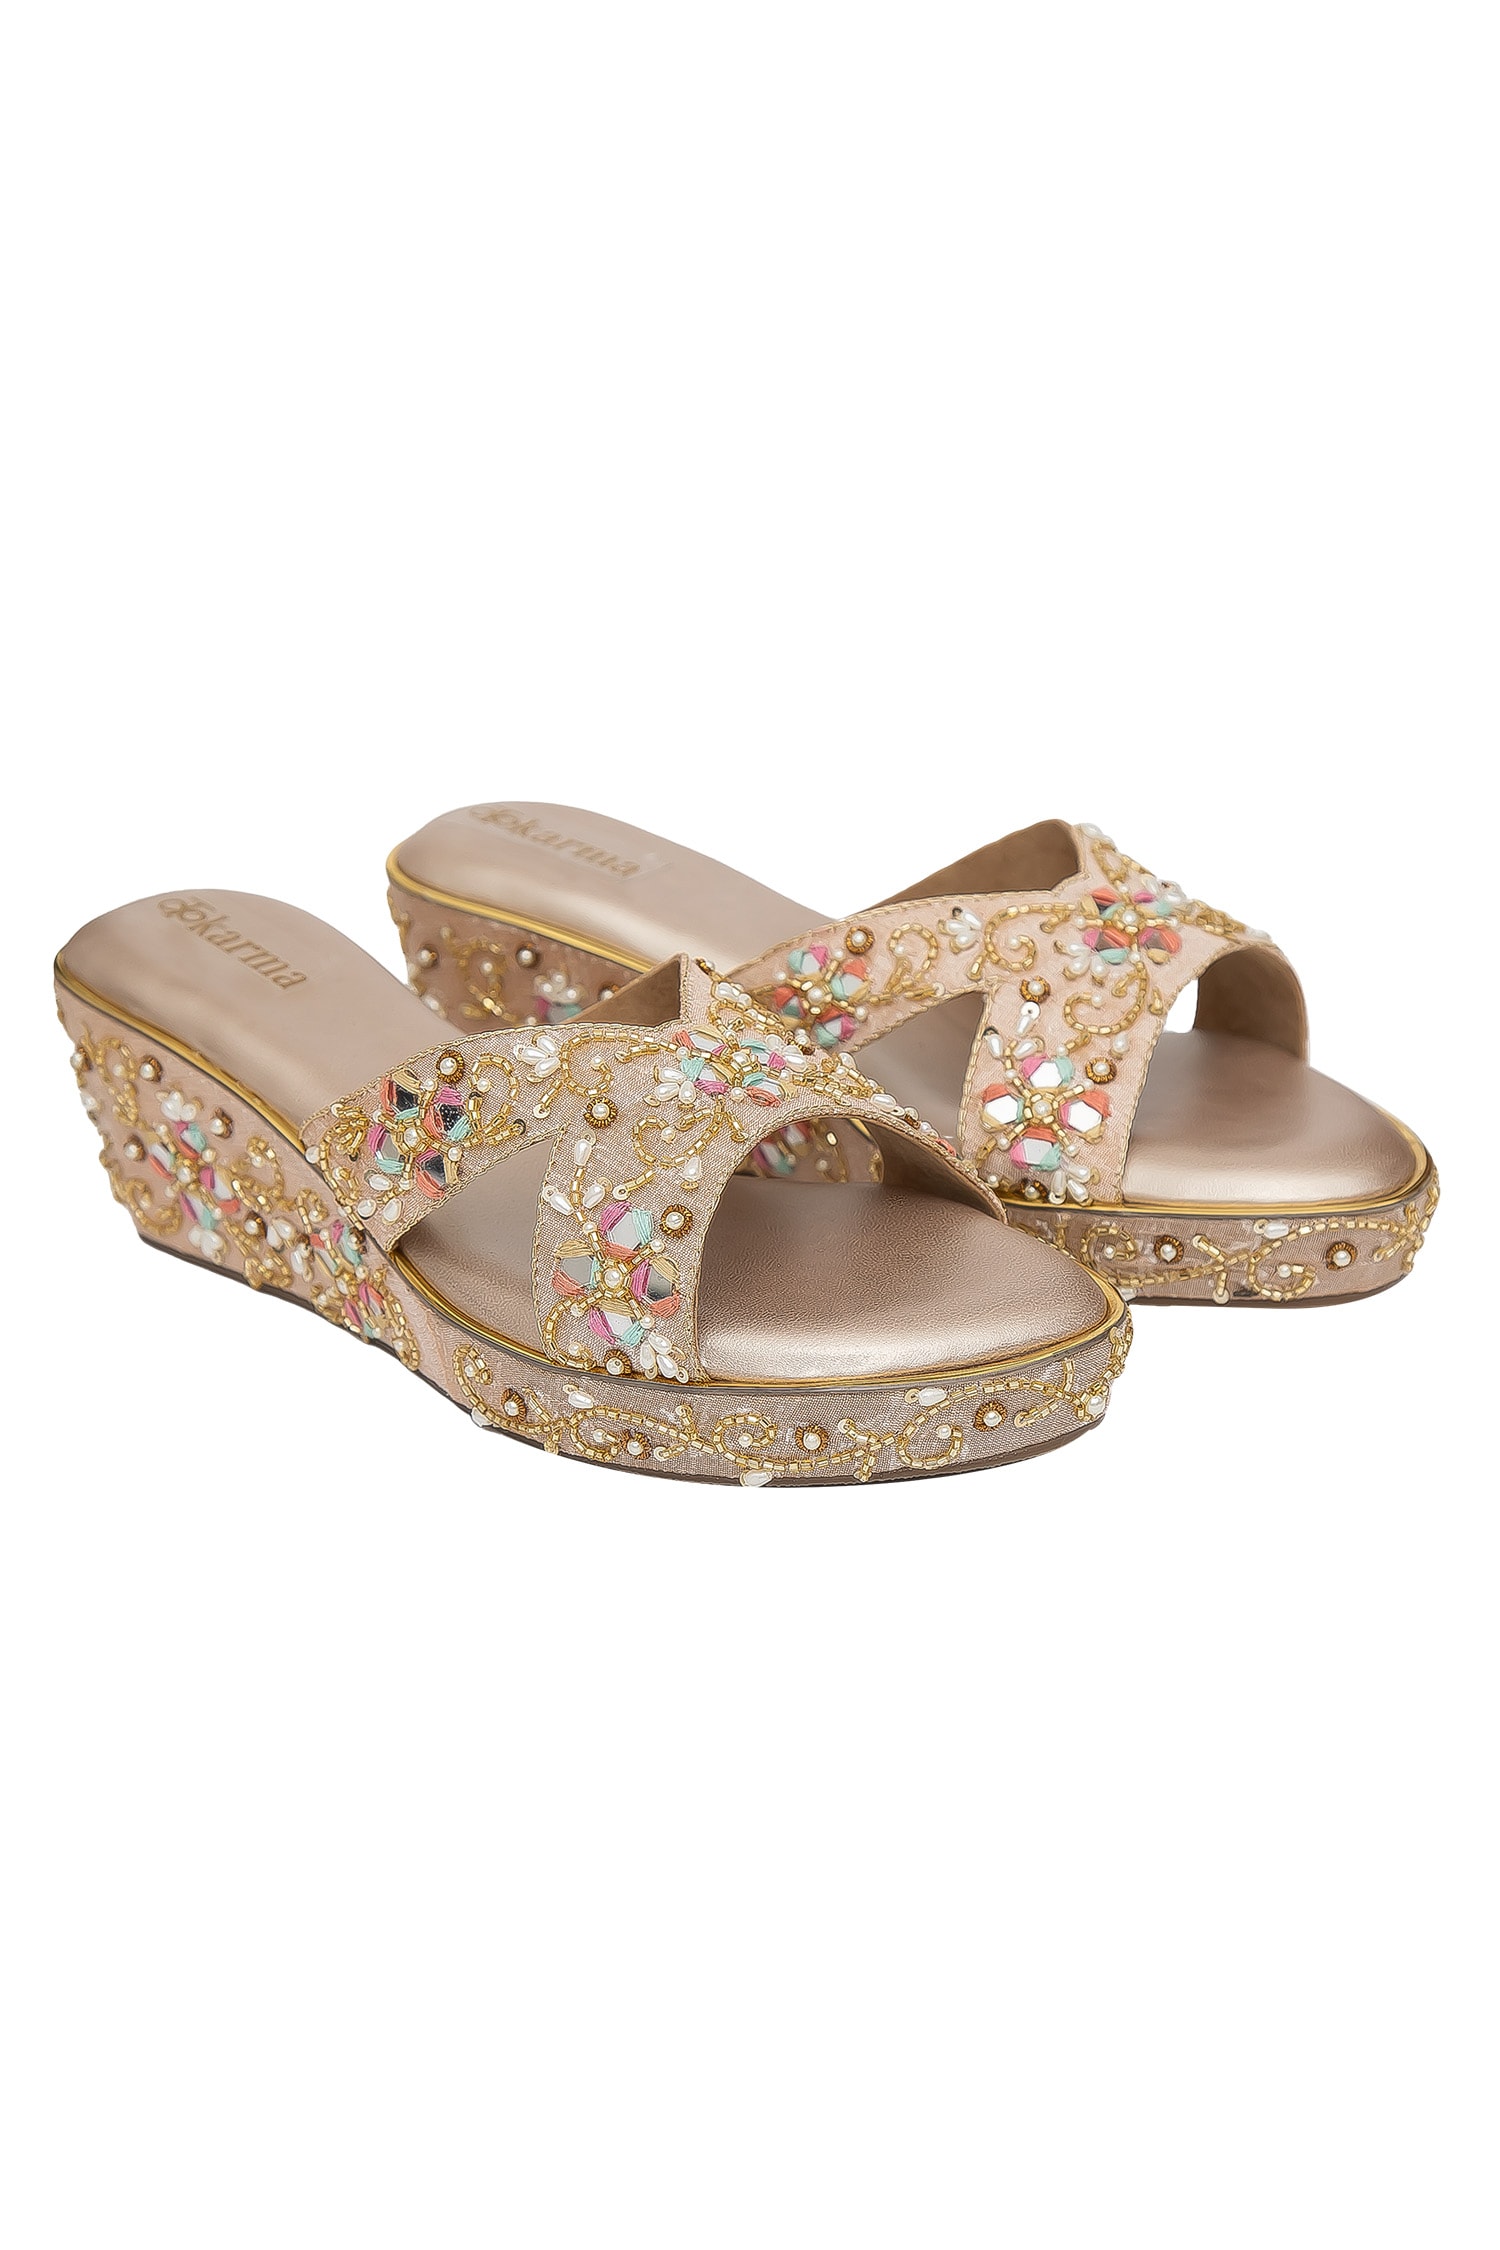 Buy Gold Embroidered Inaayat Platform Wedges by Kkarma Online at Aza ...